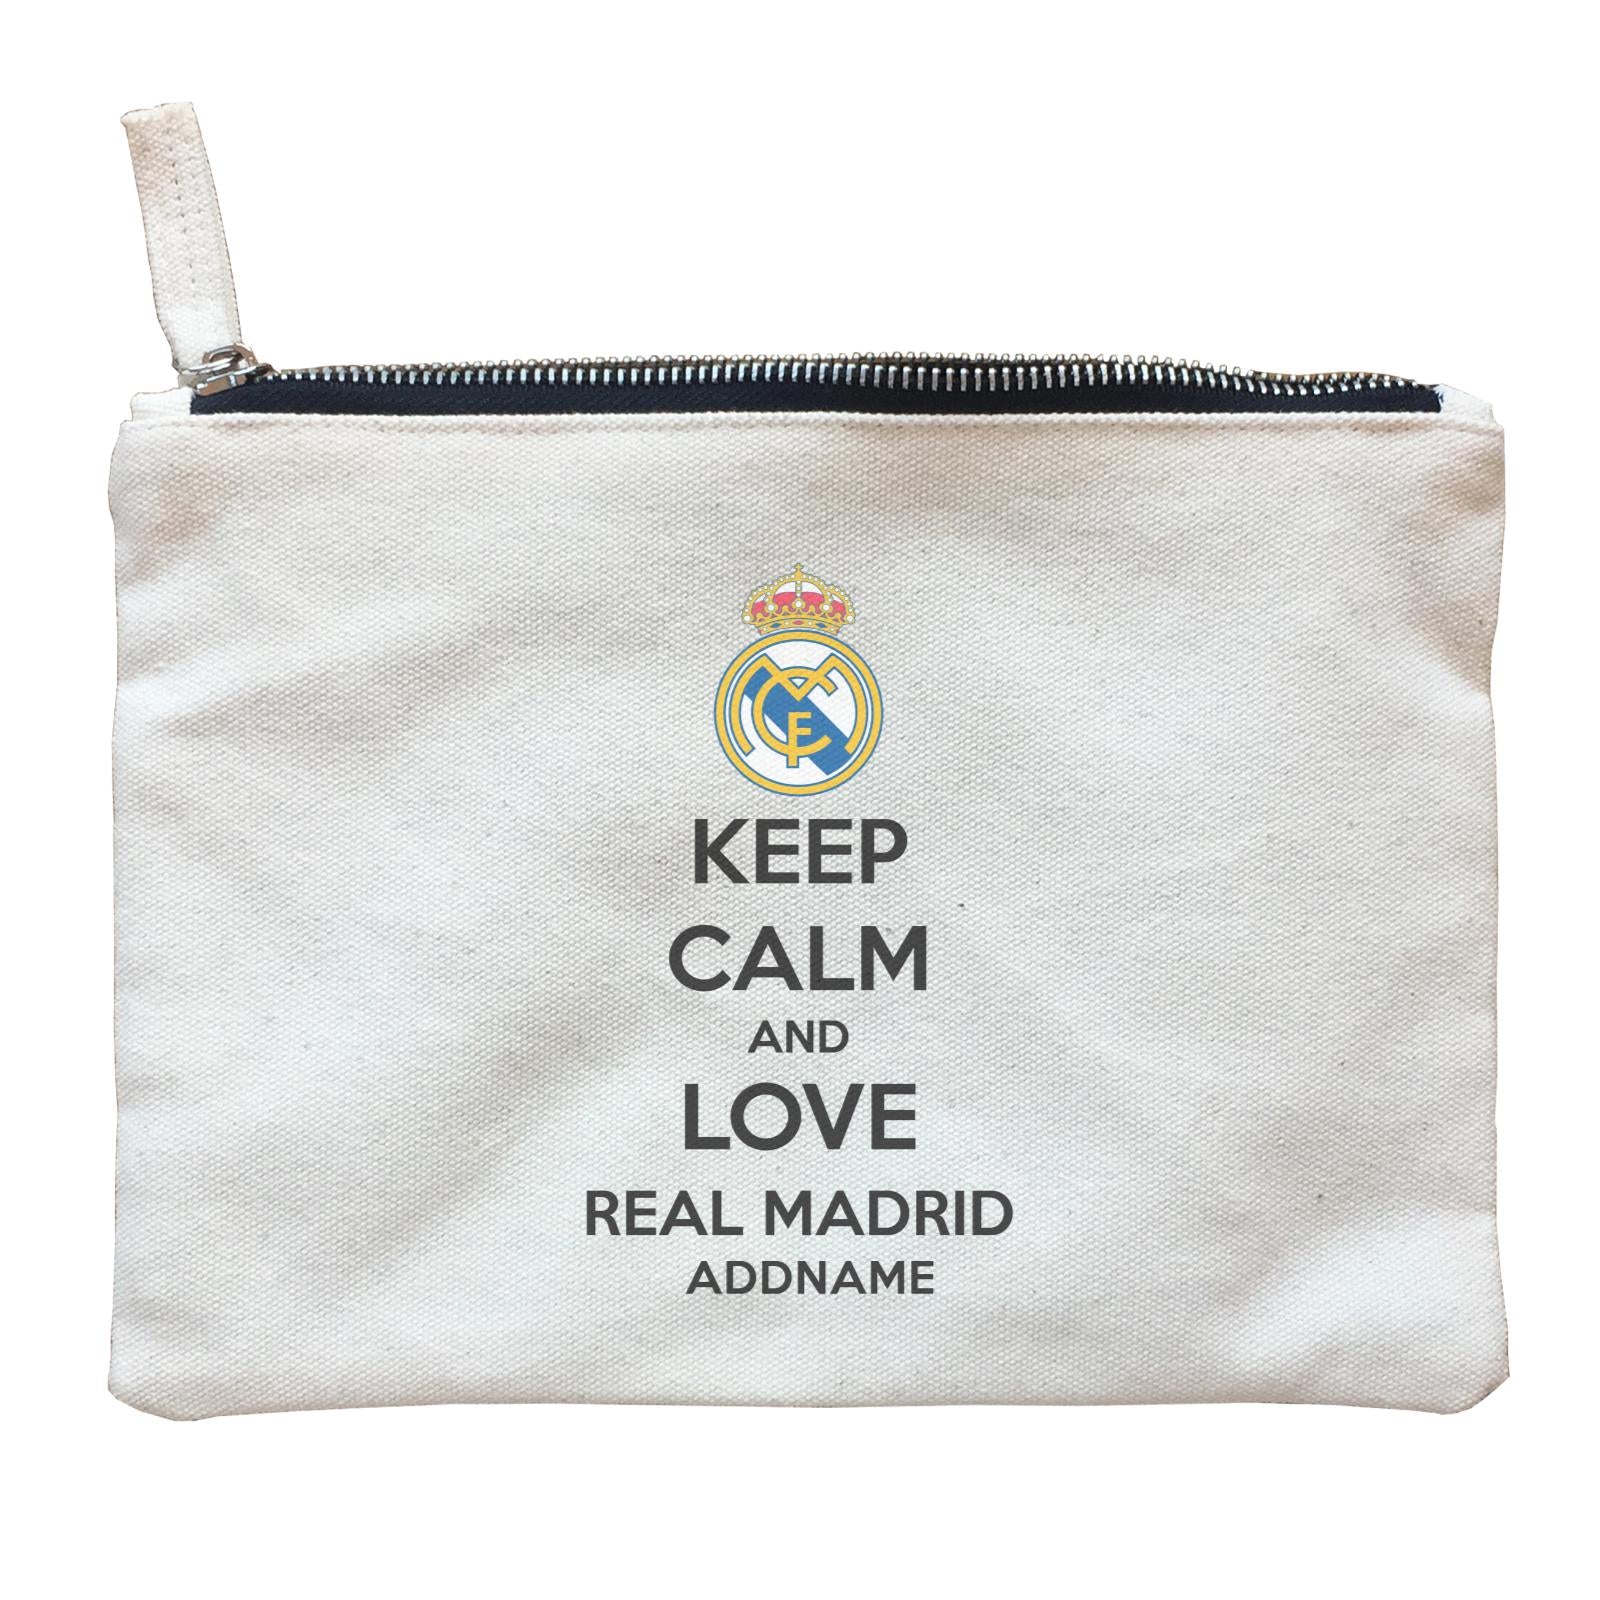 Real Madrid Football Keep Calm And Love Series Addname Zipper Pouch